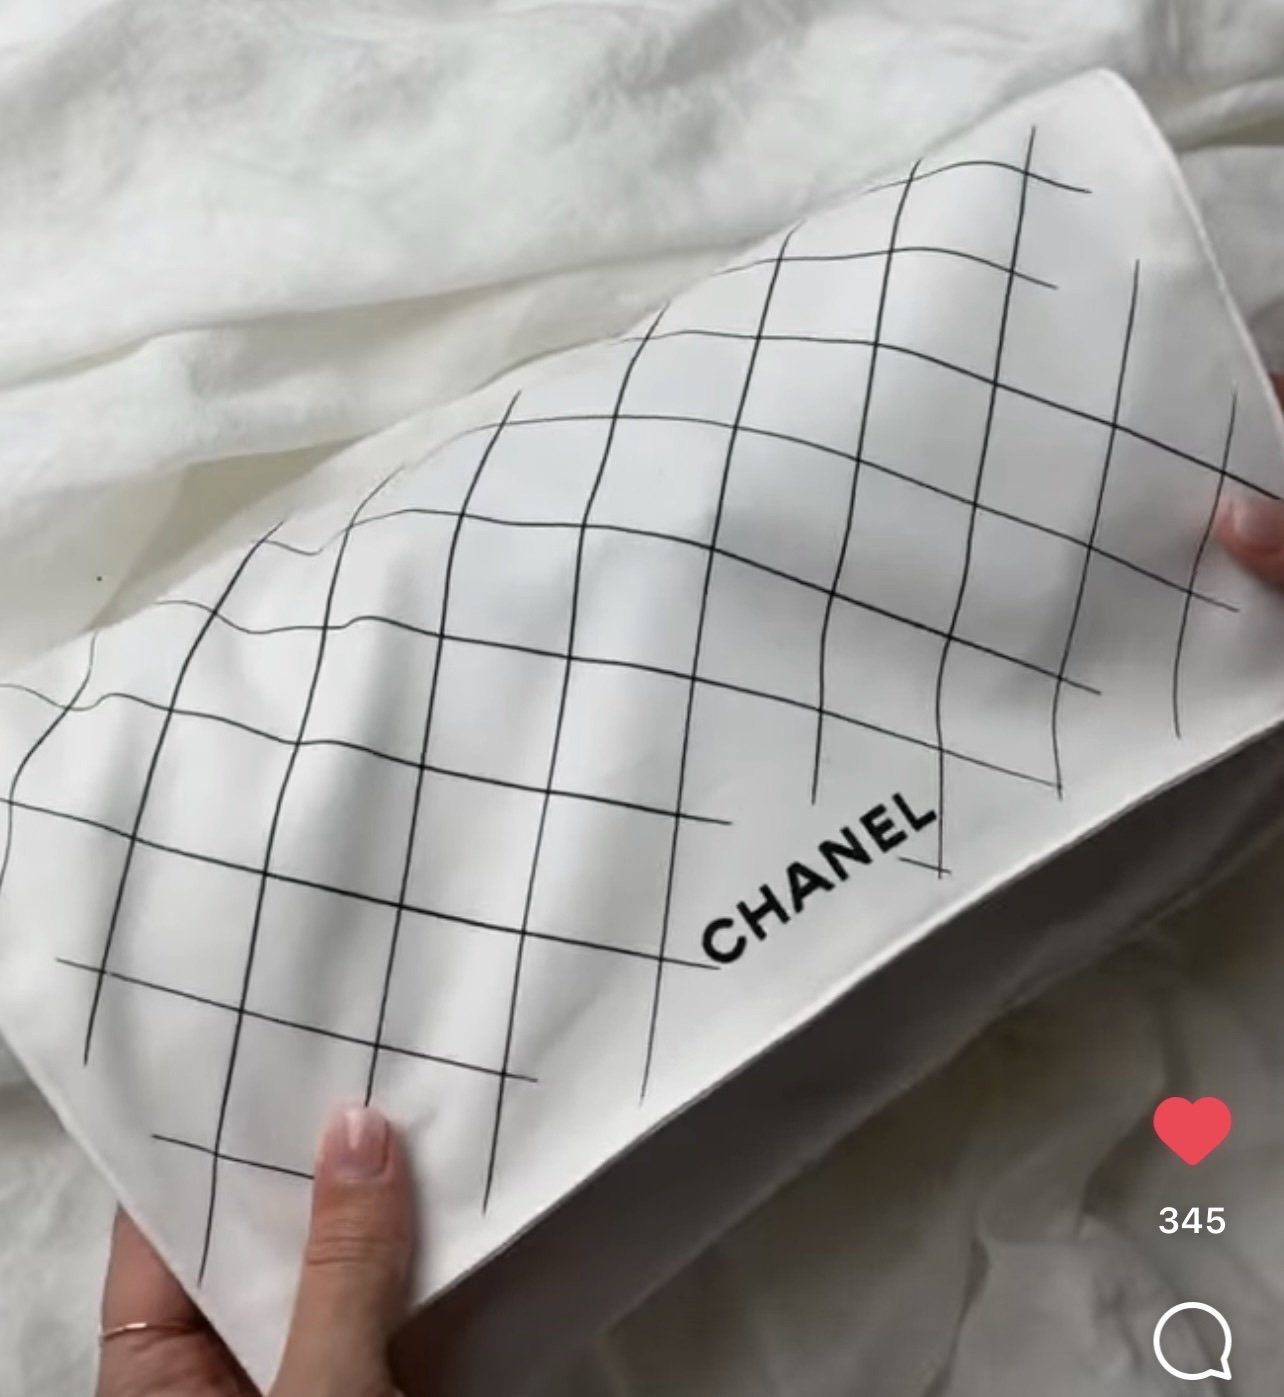 NEW 100 Authentic CHANEL Karl Lagerfeld SMALL Flap Dust Bag ICOT1 13x 85  x 3in  eBay